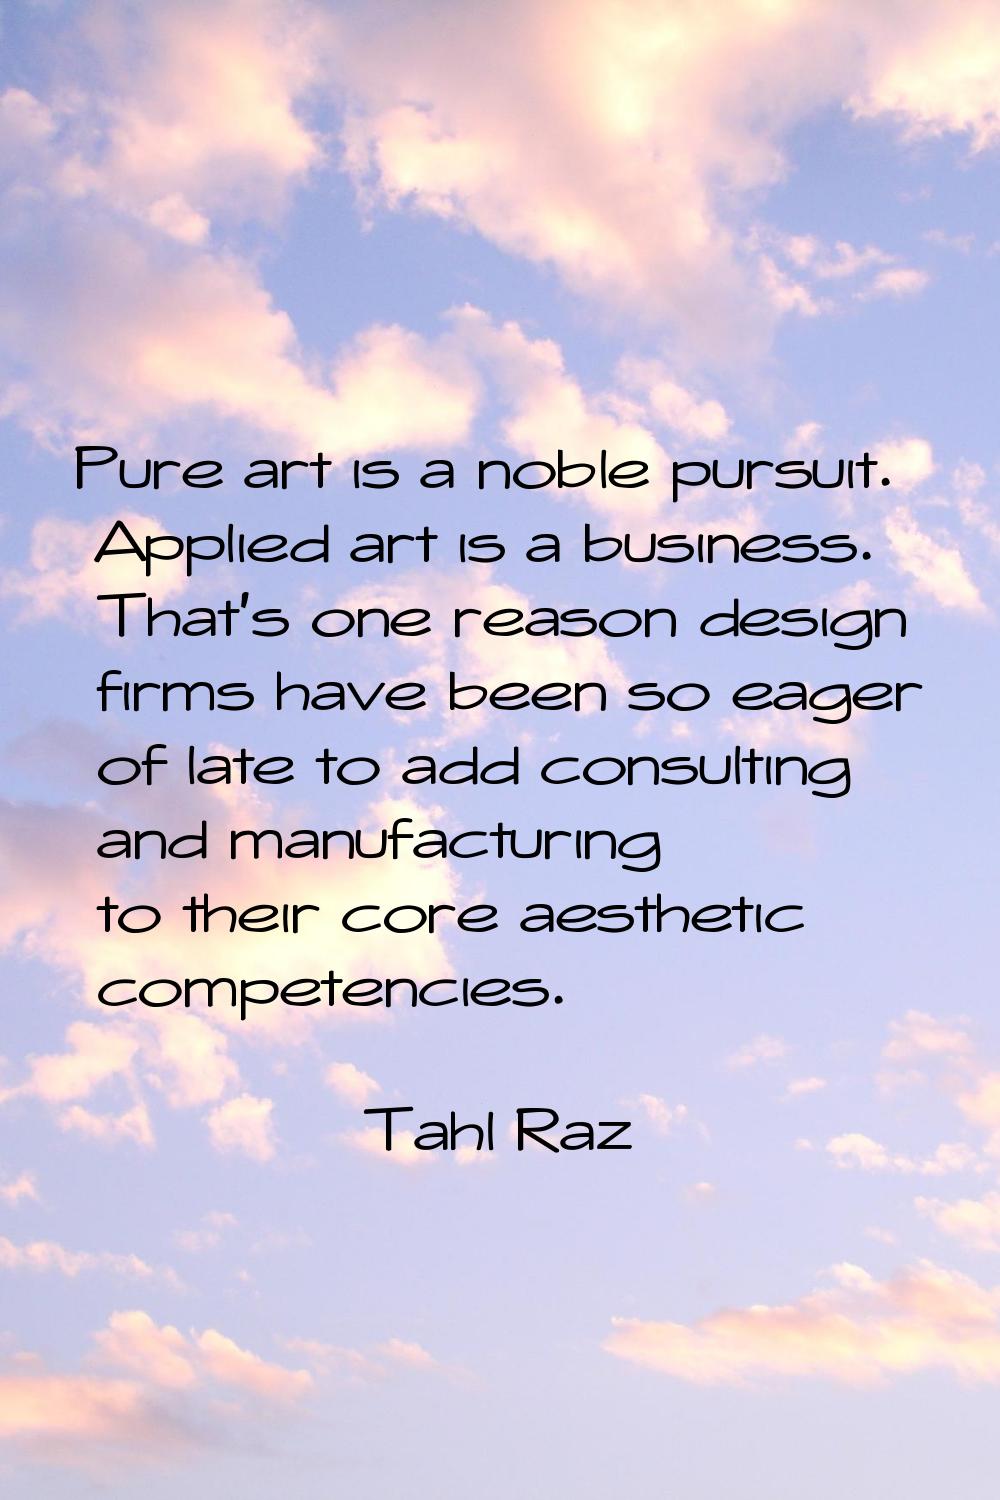 Pure art is a noble pursuit. Applied art is a business. That's one reason design firms have been so